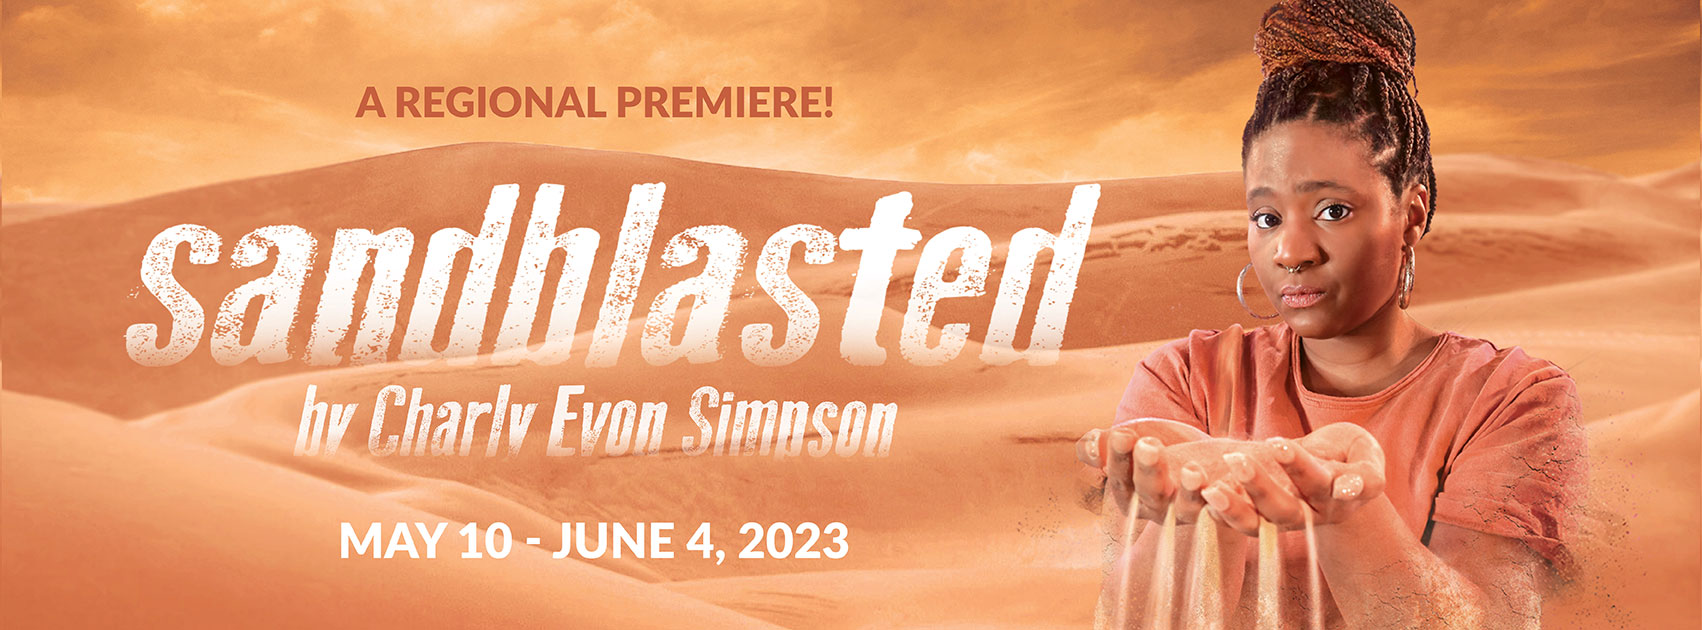 A picture of Jessica Johnson turning into sand against a desert background with the words "Regional Premiere sandblasted by Charly Evon Simpson May 10-June 4, 2023"